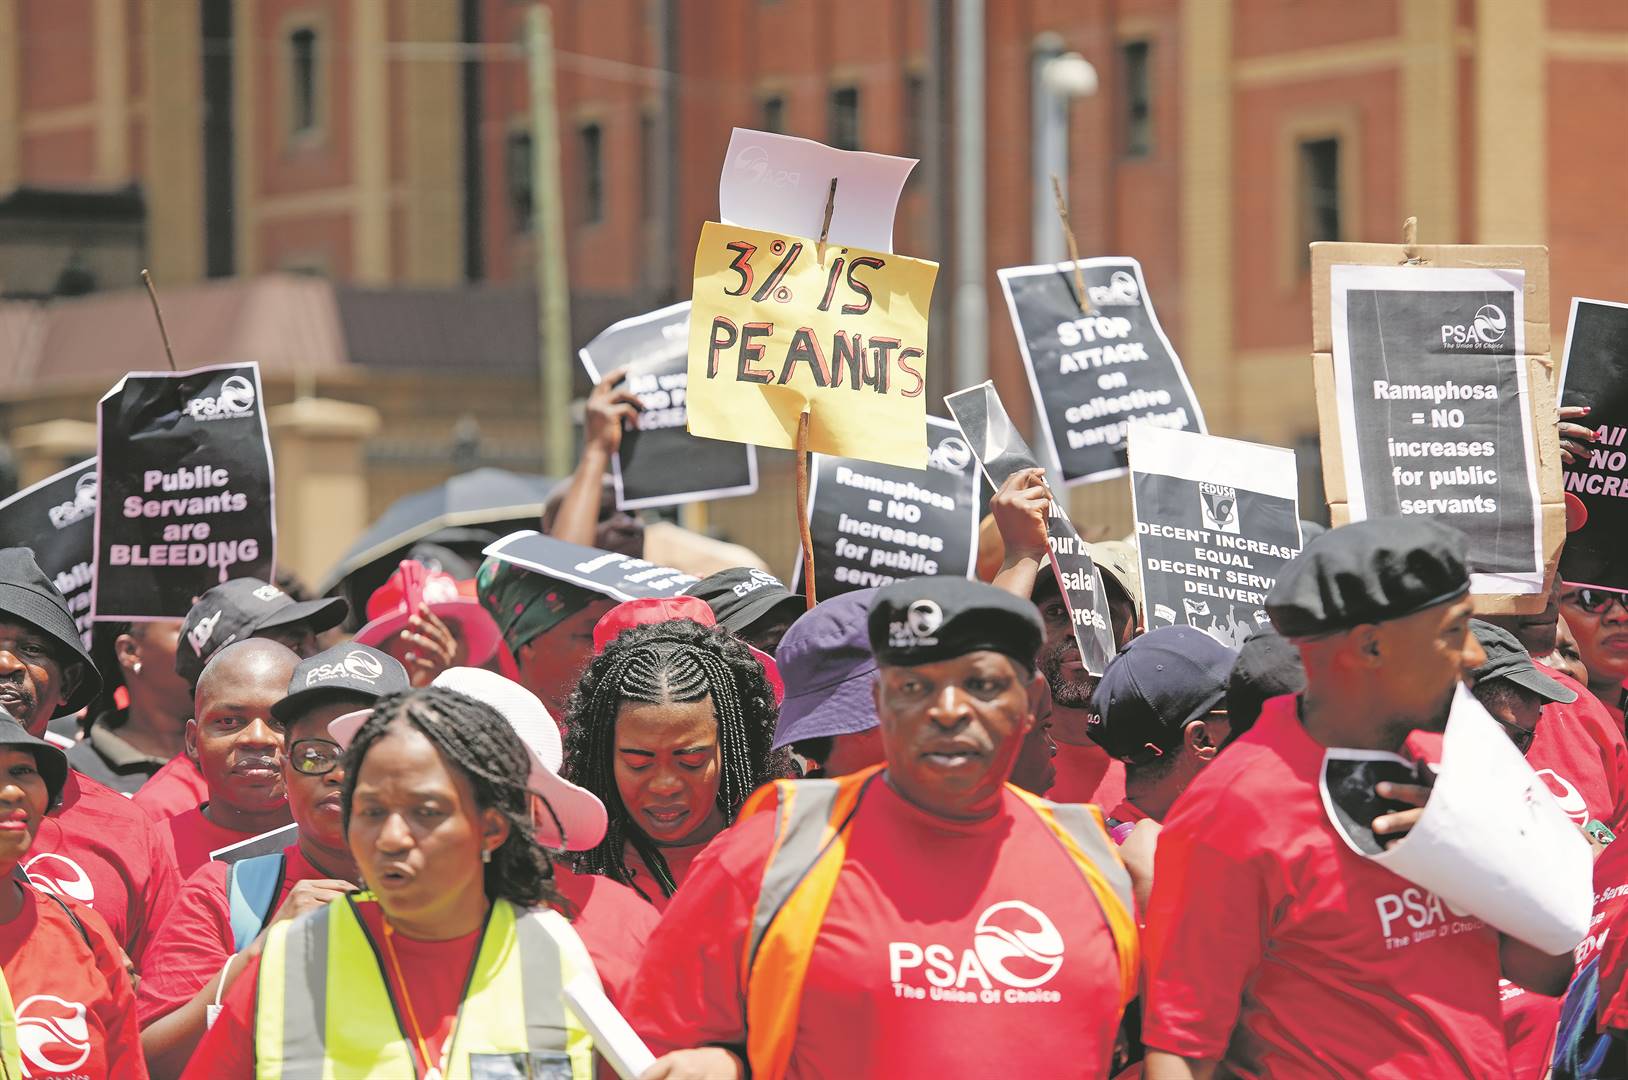 Workers affiliated with the Public Servants Association of SA are unhappy with the dictated 3% salary hike. Photo: Tebogo Letsie